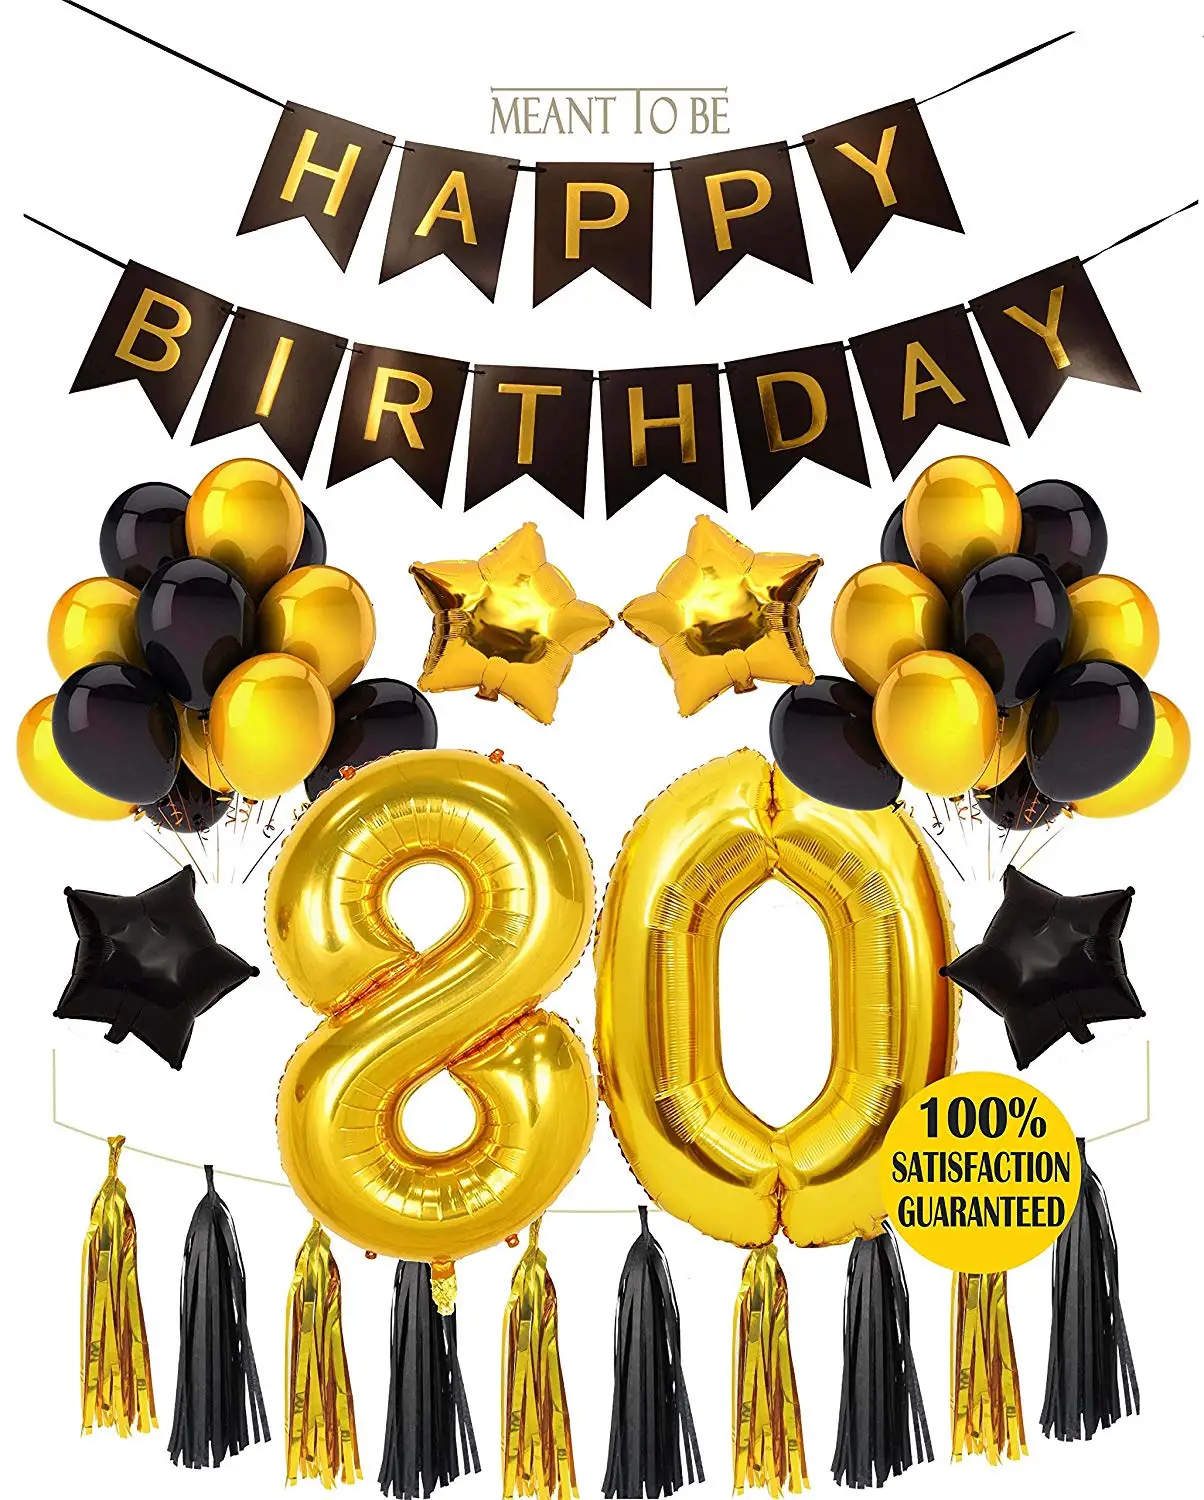 2nd Birthday Balloons Black and Gold Balloons 2nd Birthday Party Decorations Black Two Fancy Balloons Second Birthday Photo Prop 2 Fancy Set of 3 Two 2nd Birthday Party Decorations